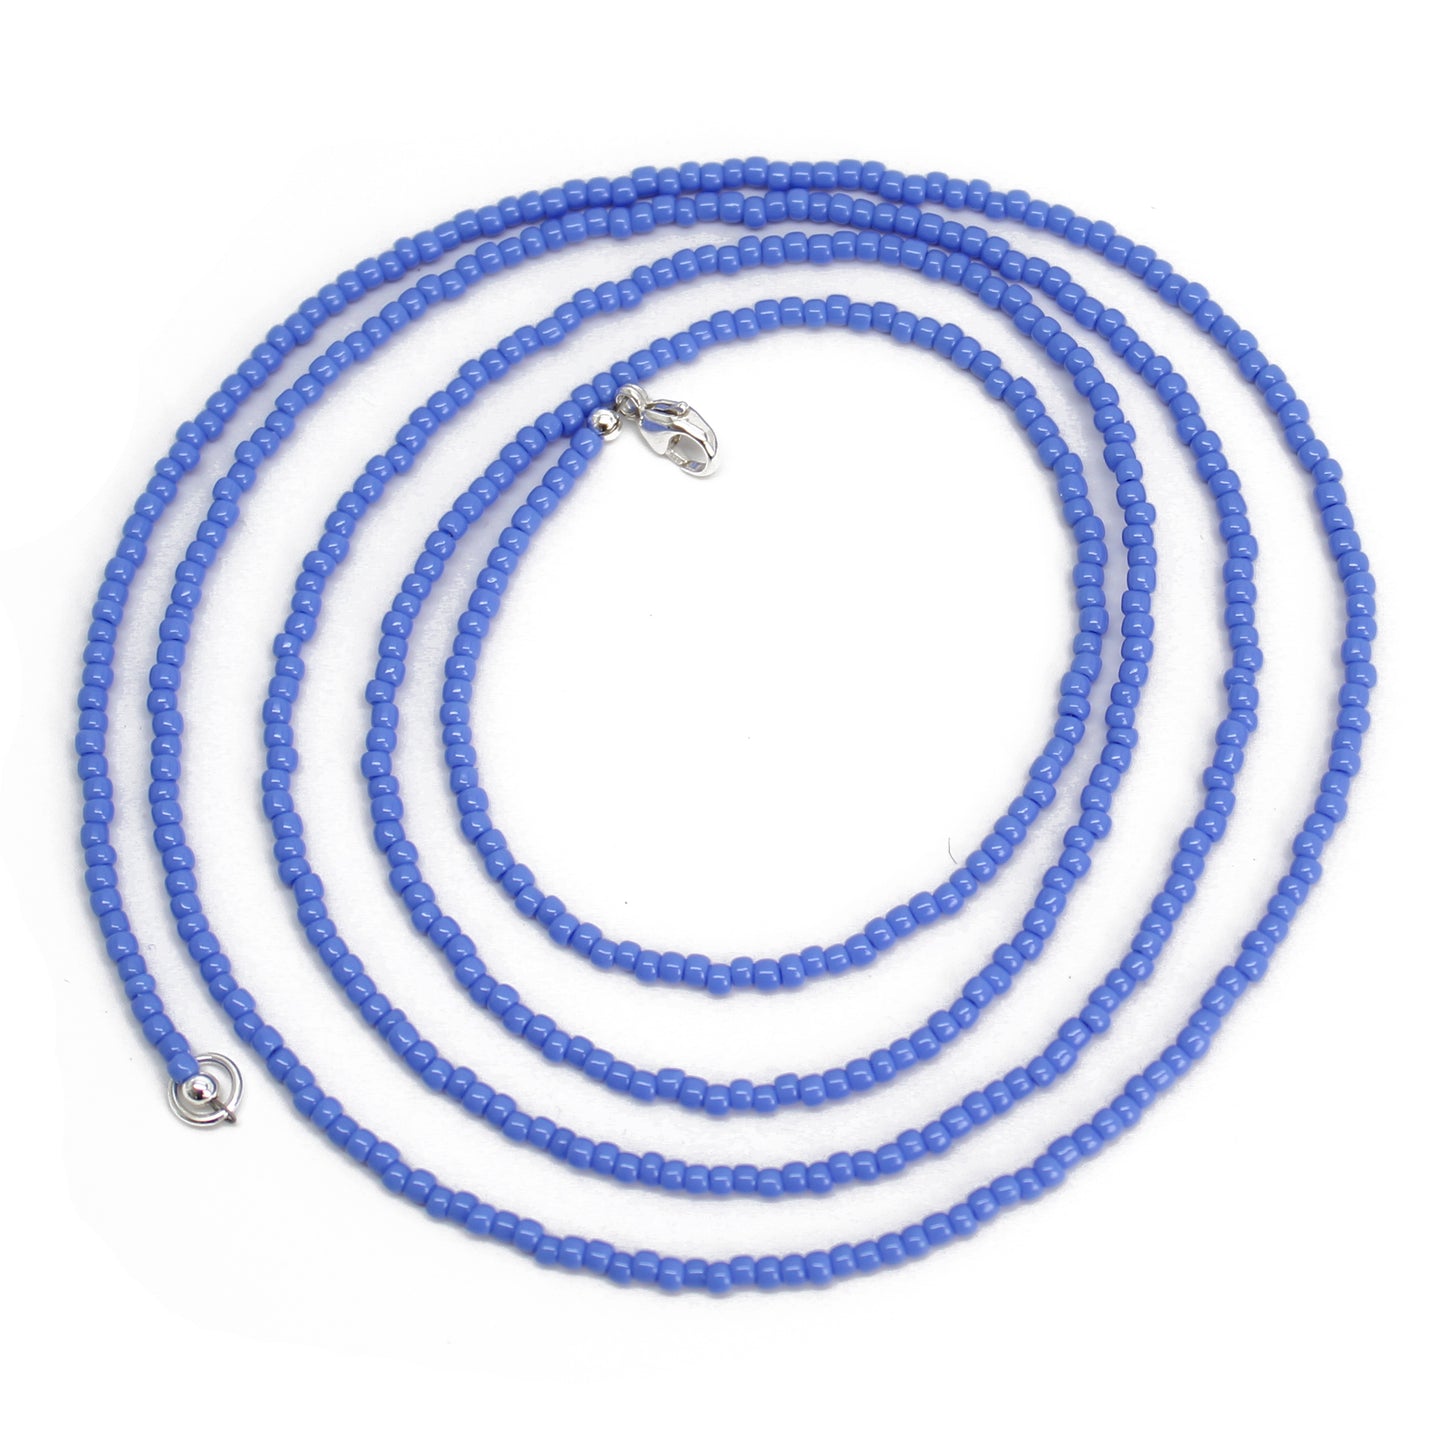 Red, Silver & Blue Bead Necklaces, 50ct | Party City